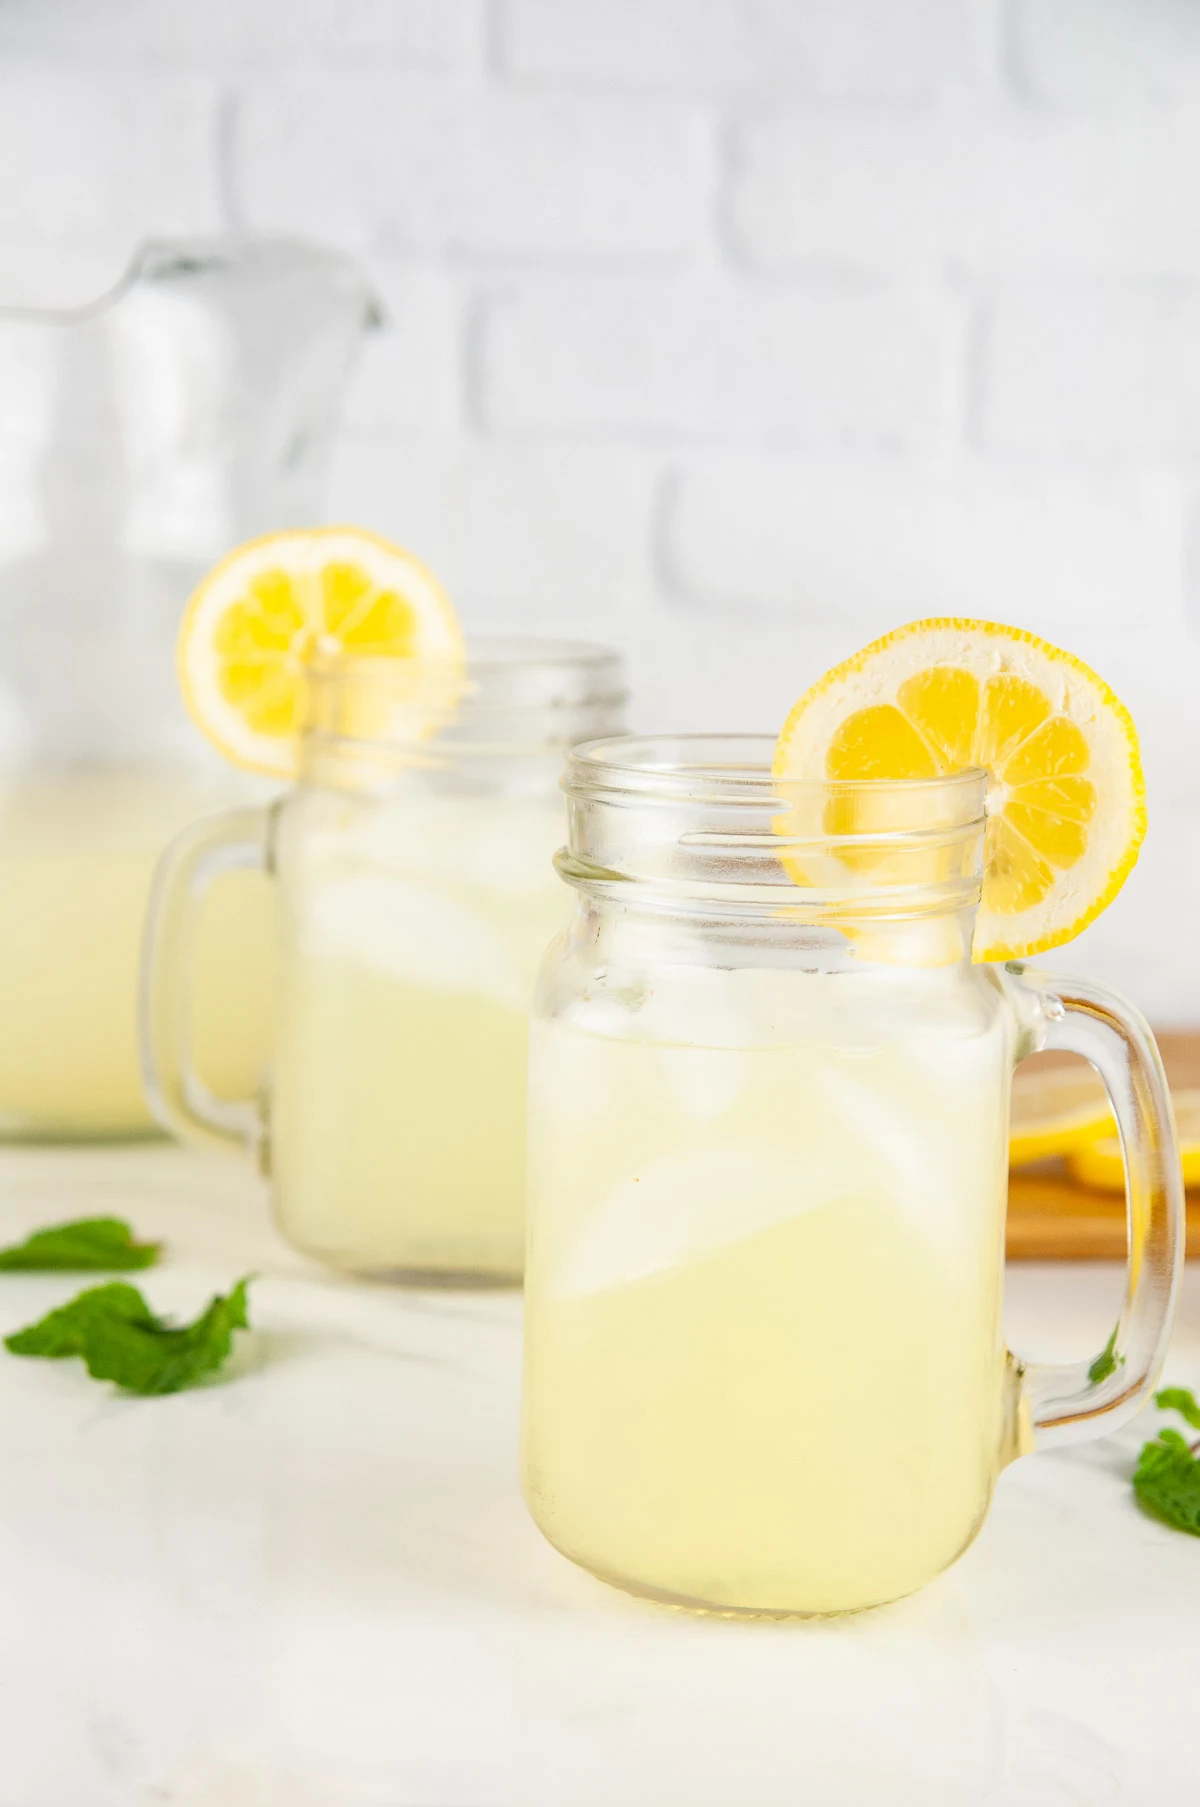 This easy alcoholic lemonade cocktail recipe uses the classic summer drink to make an adult, boozy beverage. You'll be sipping this spiked lemonade all summer long!